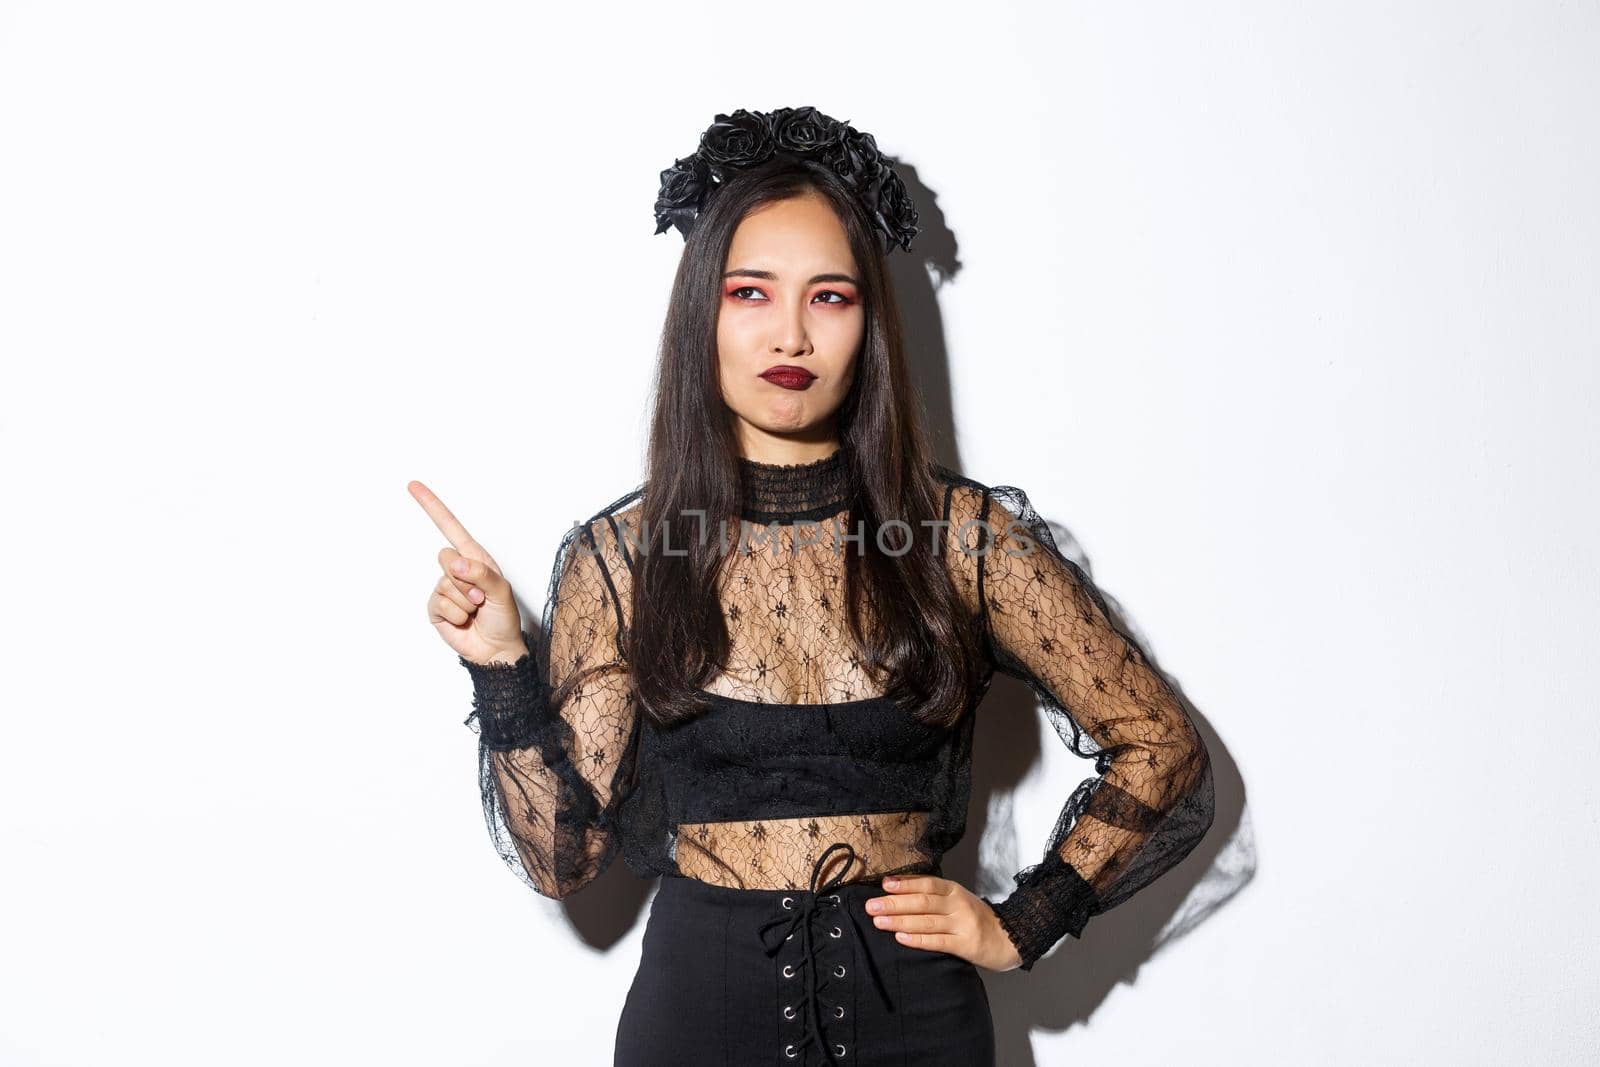 Unamused and skeptical asian beautiful woman in witch dress, looking at upper left corner with displeased smirk, standing over white background, showing logo or promo banner.